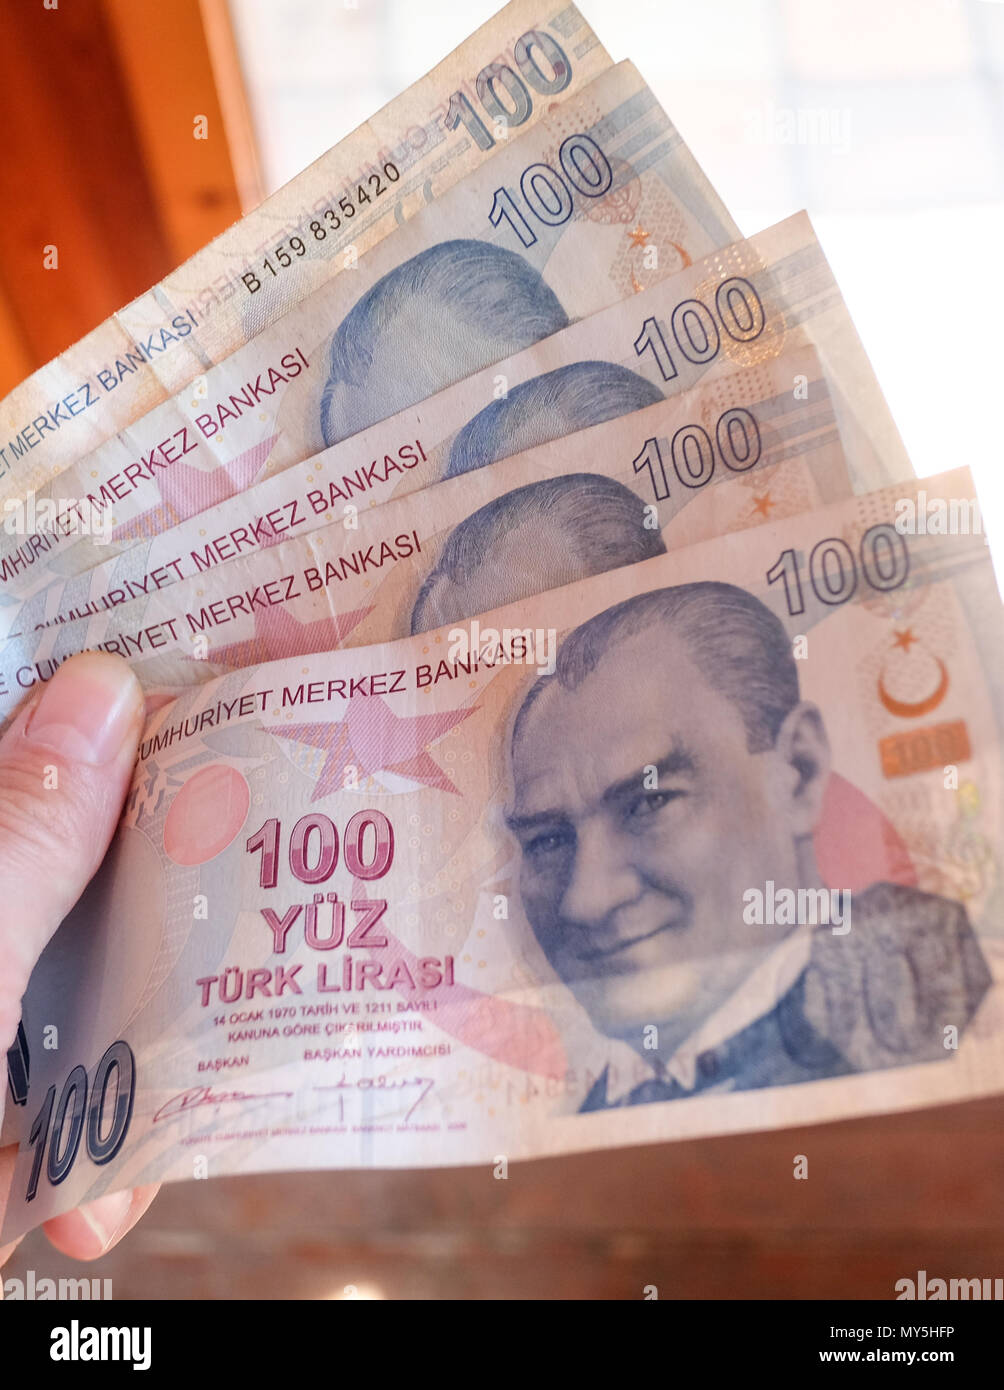 31.05.2018, Dalyan, Turkey: One hand holding 100 lira banknotes. In Turkey, inflation has risen following sharp falls in the country's currency lira. Photo: Jens Kalaene/dpa central image/dpa | usage worldwide Stock Photo